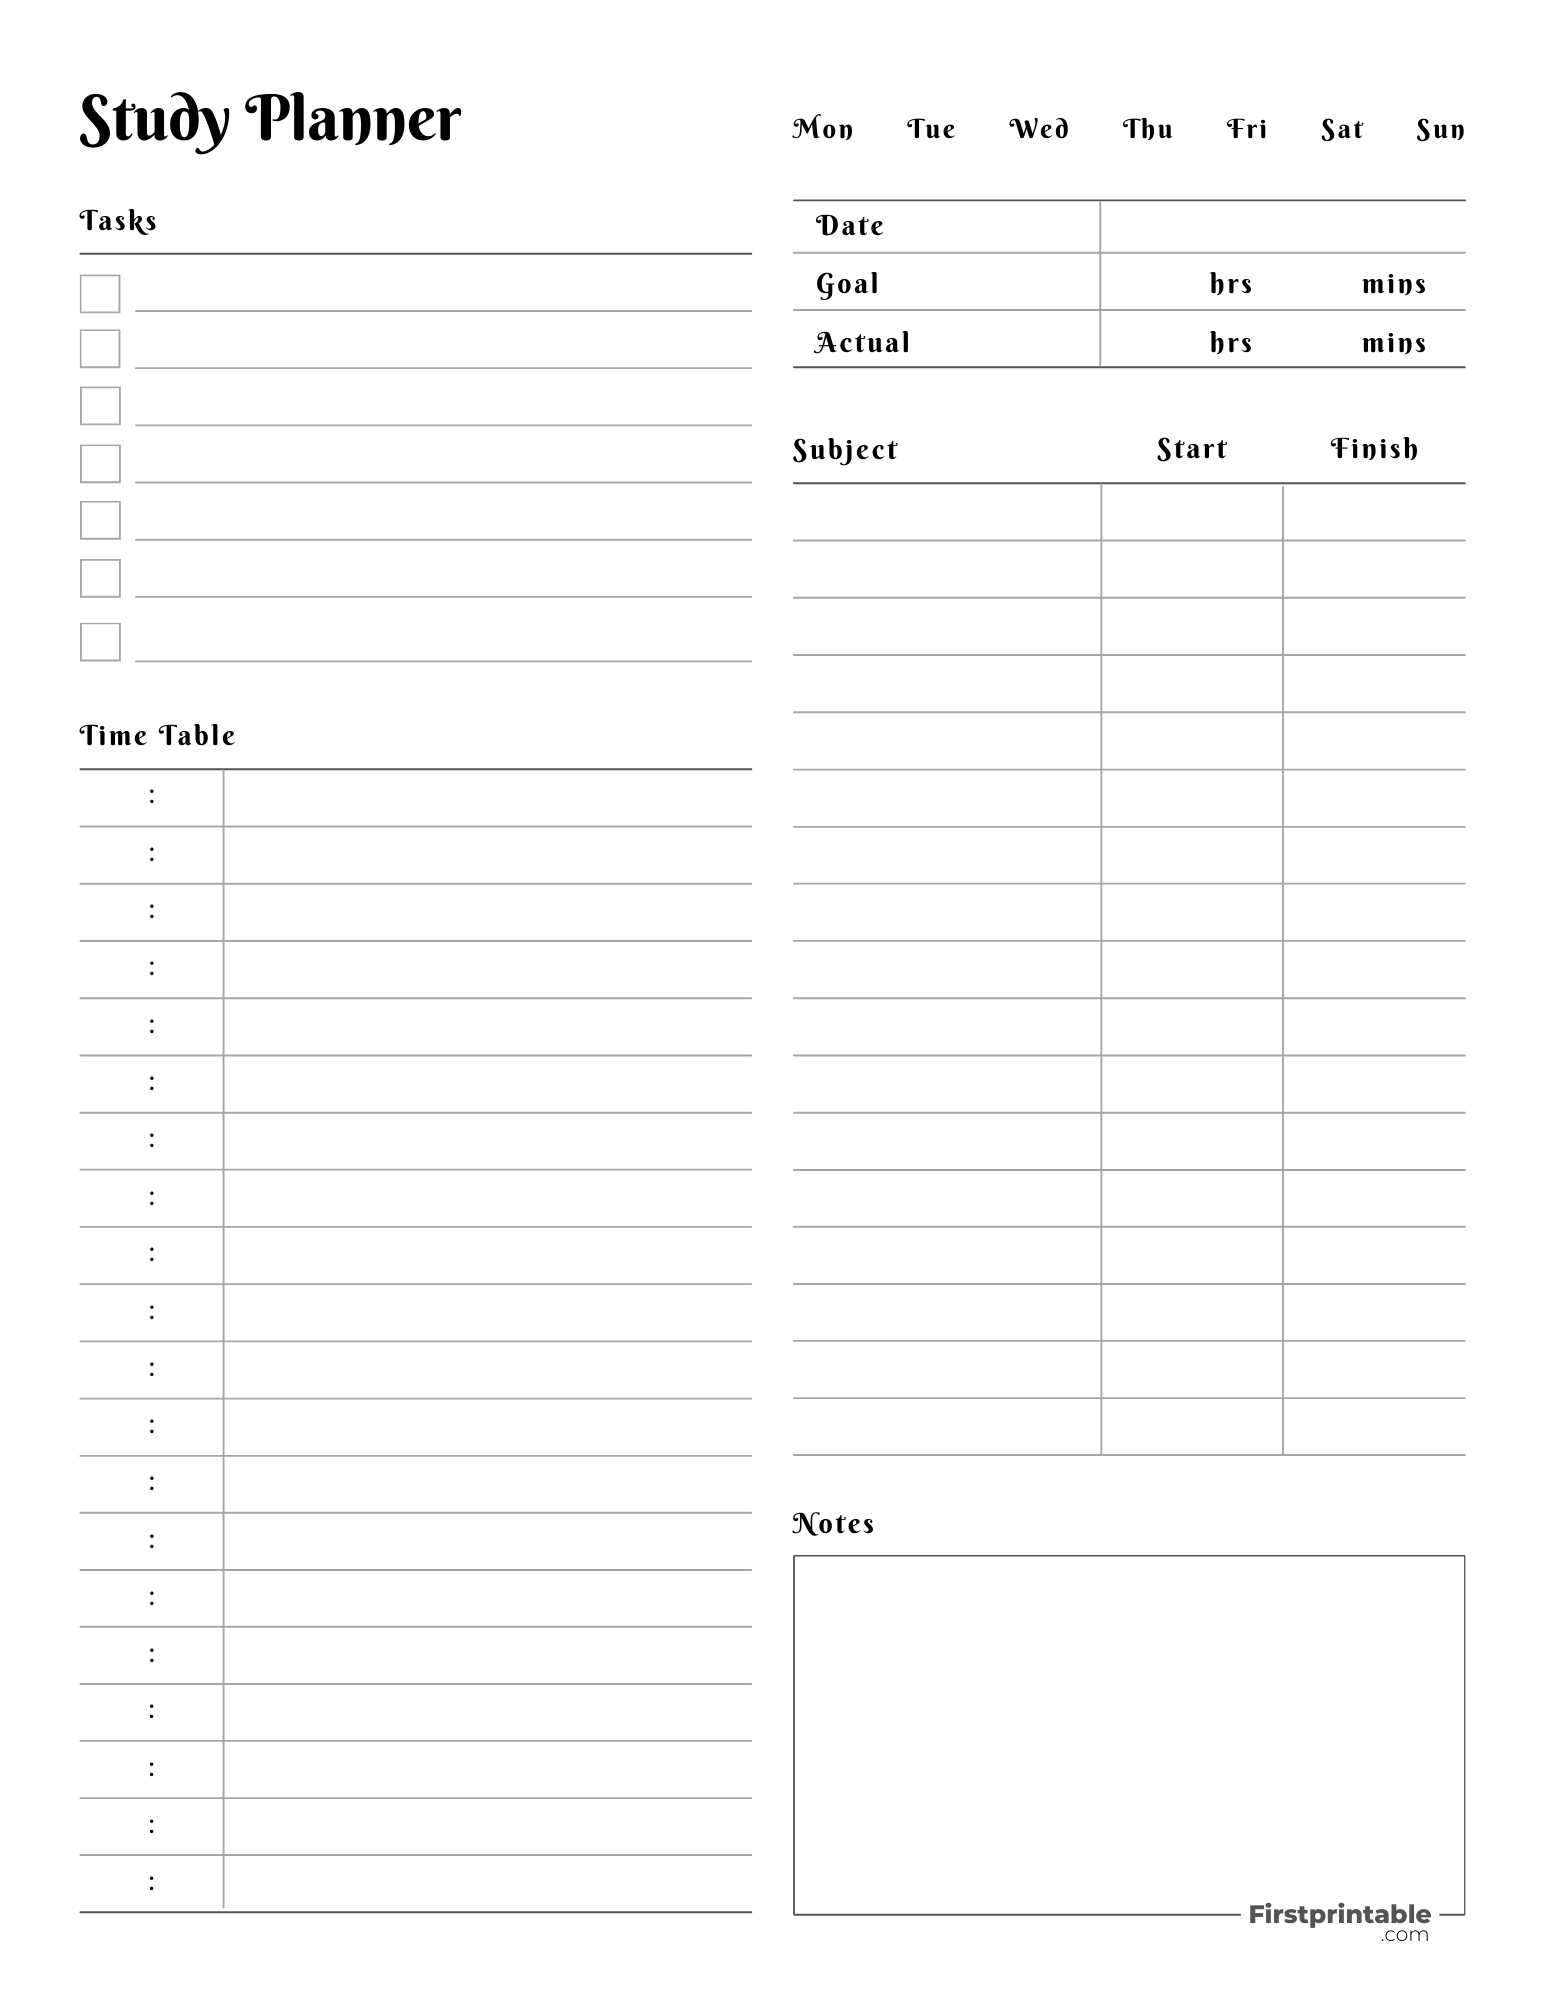 Free Printable Daily Study Planner with Stylish font - Fillable PDF Format